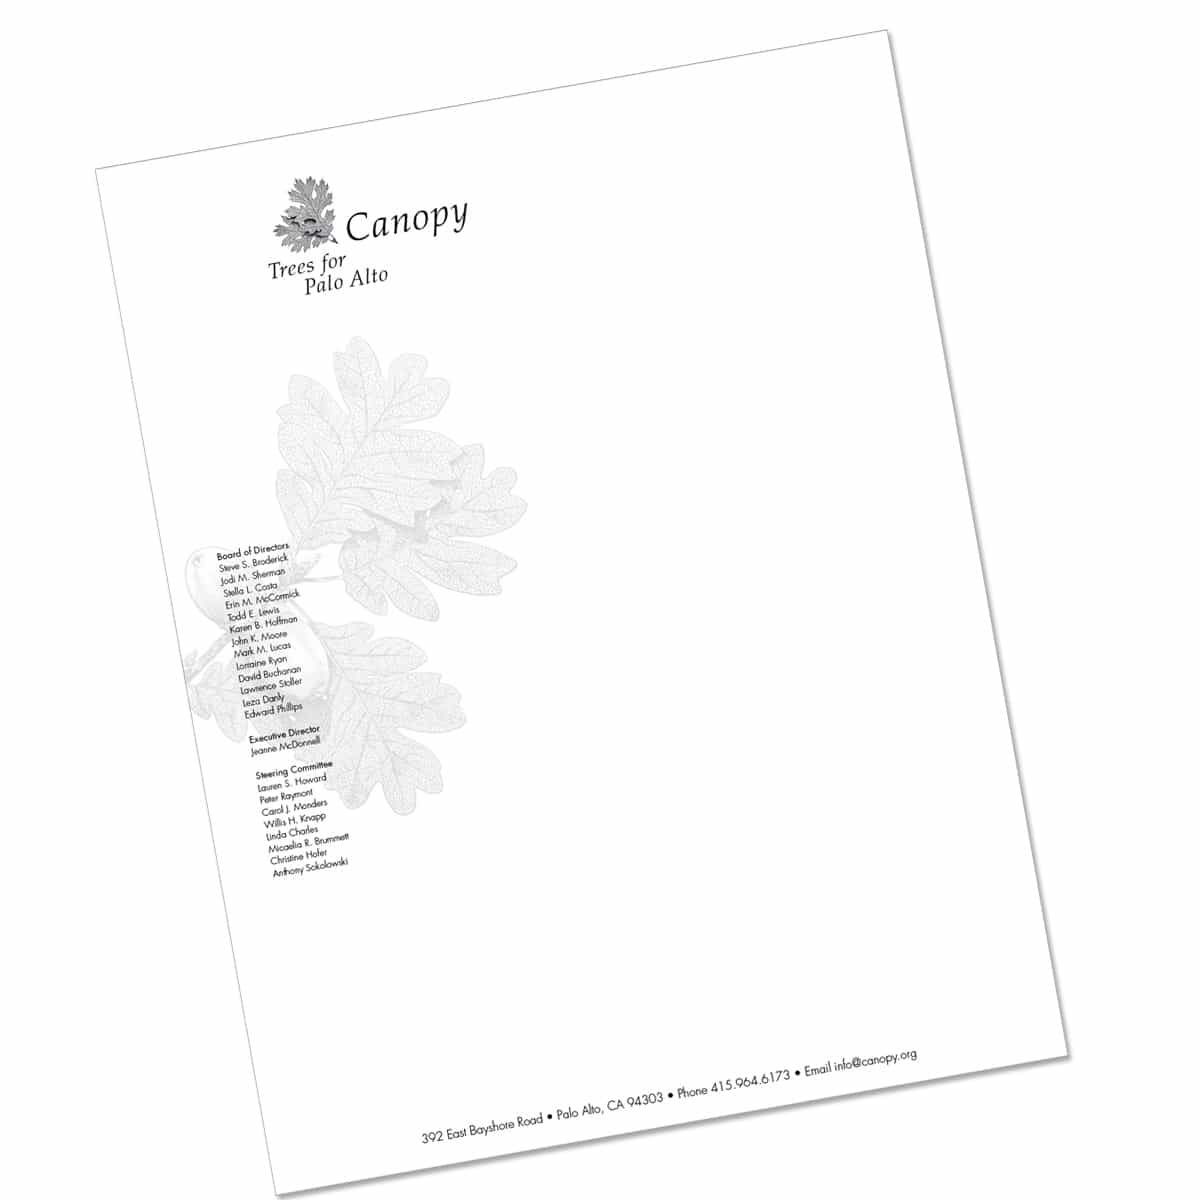 Branding, logo, graphic design, typography for Canopy a non profit organization to plant trees